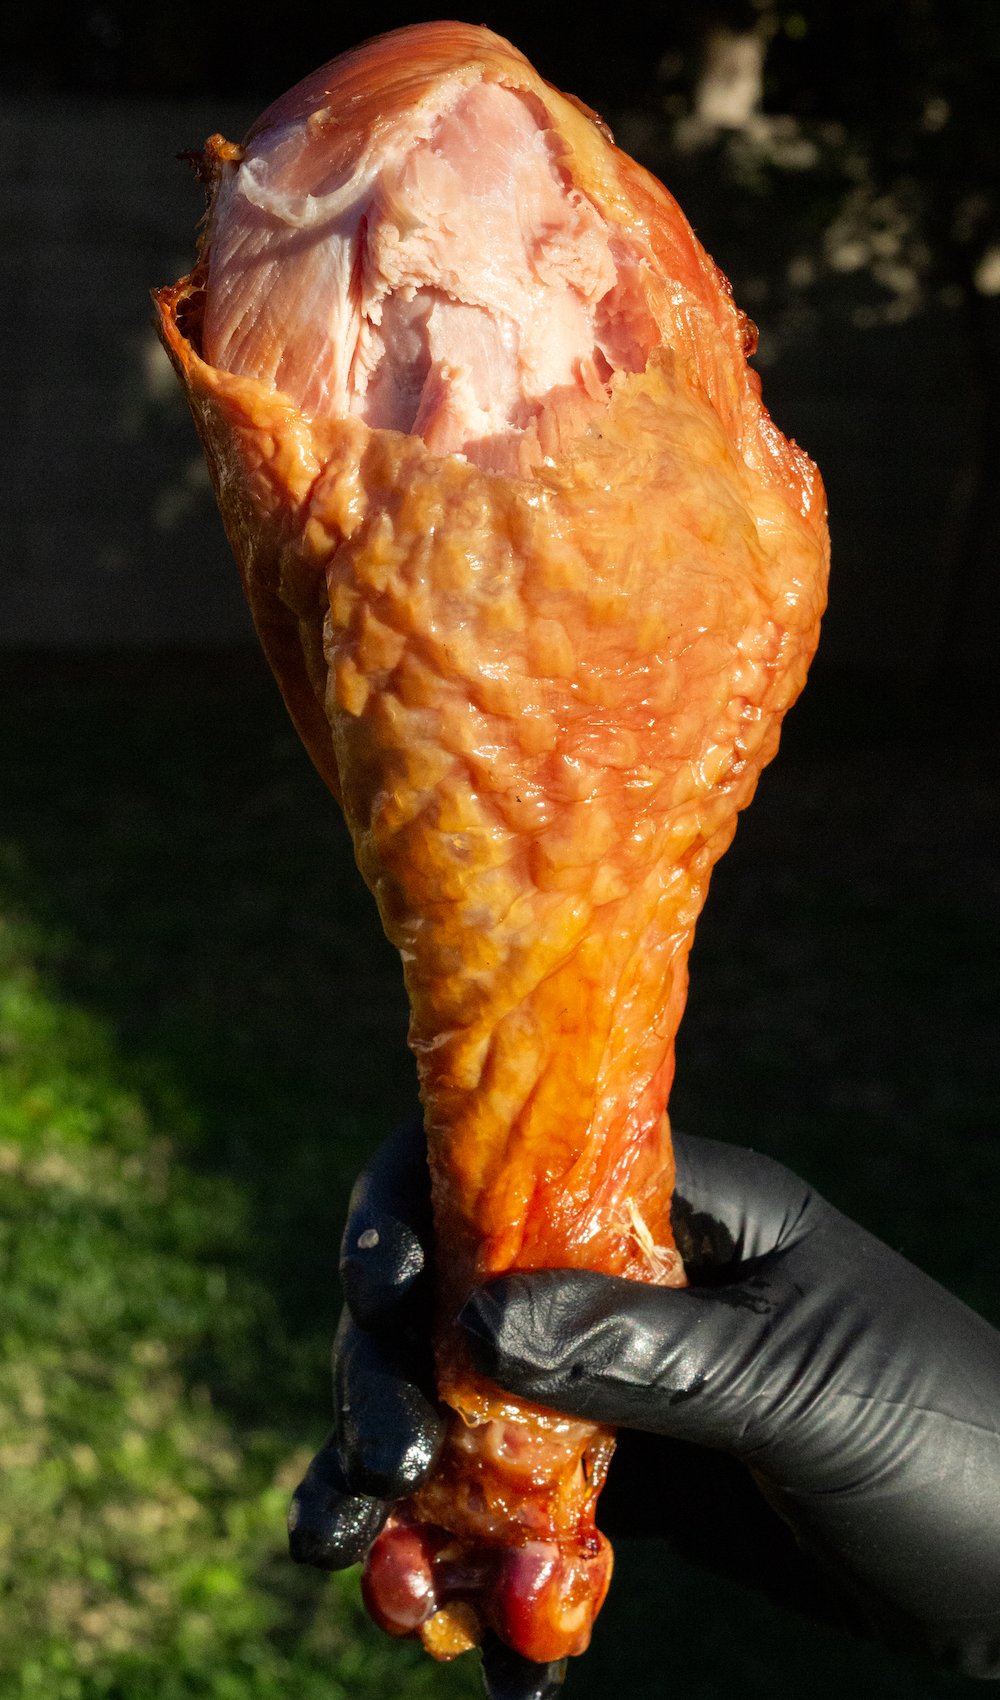 A hand with a black glove on holds up a cooked copycat Disney turkey leg that has a bite taken out of it